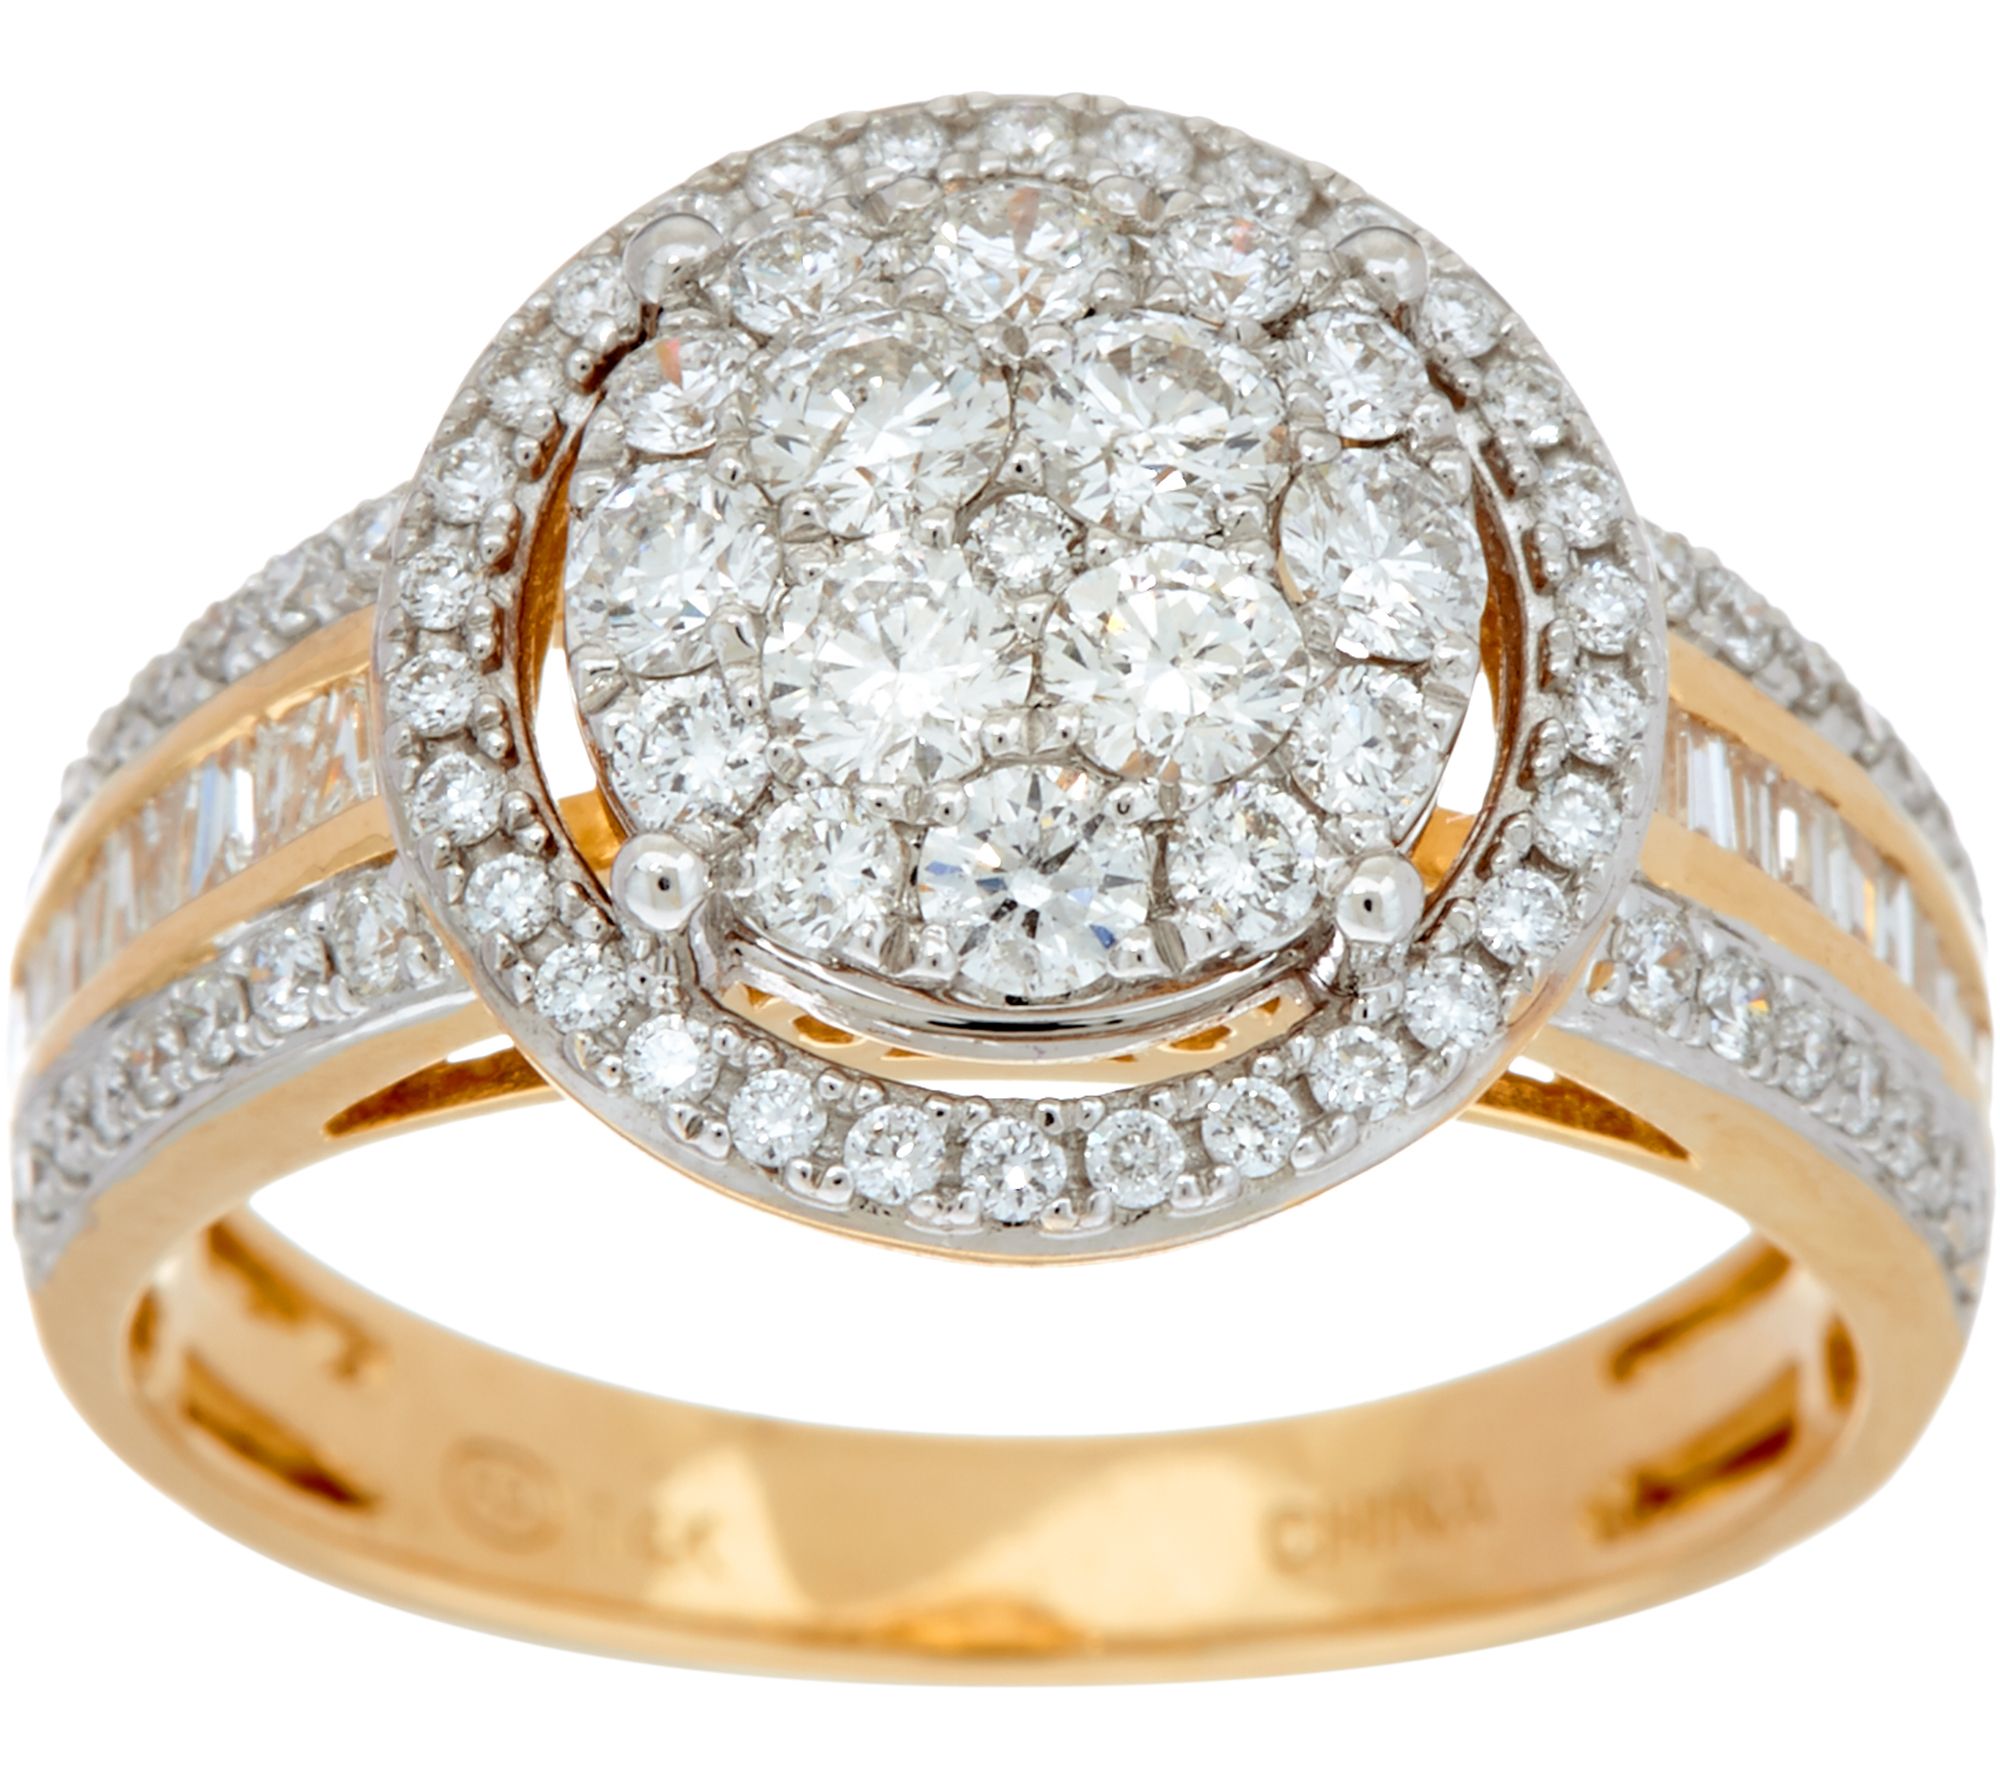 jewelry rings 1.00 cttw round cluster diamond ring 14k gold by affinity - page 1 - qvc.com ohngexa